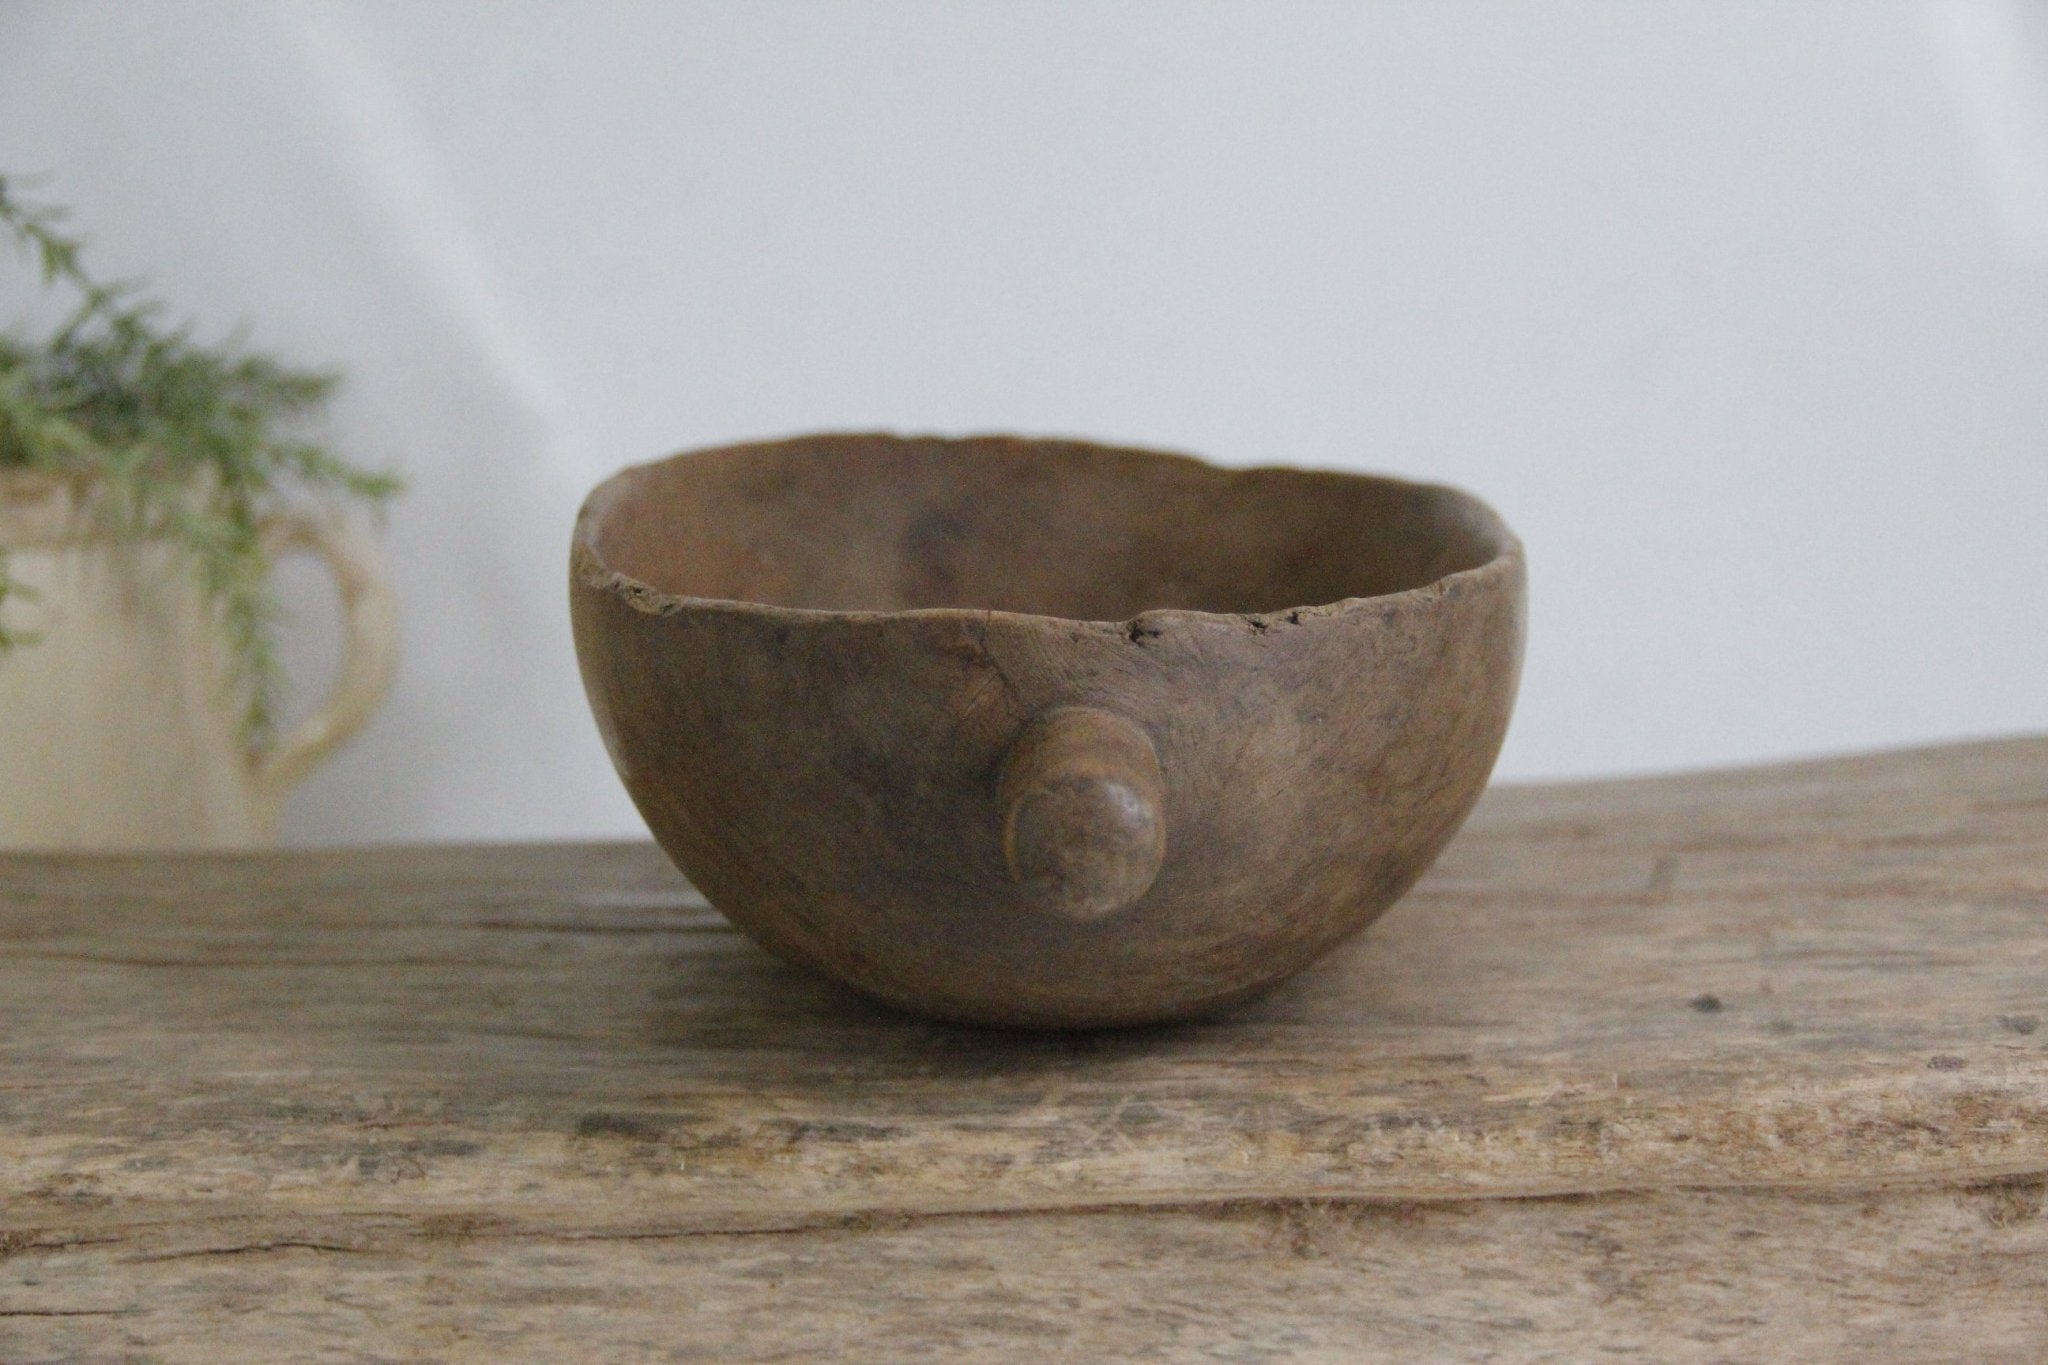 Antique Wooden Hand-Carved Bowl | Africa - Debra Hall Lifestyle2